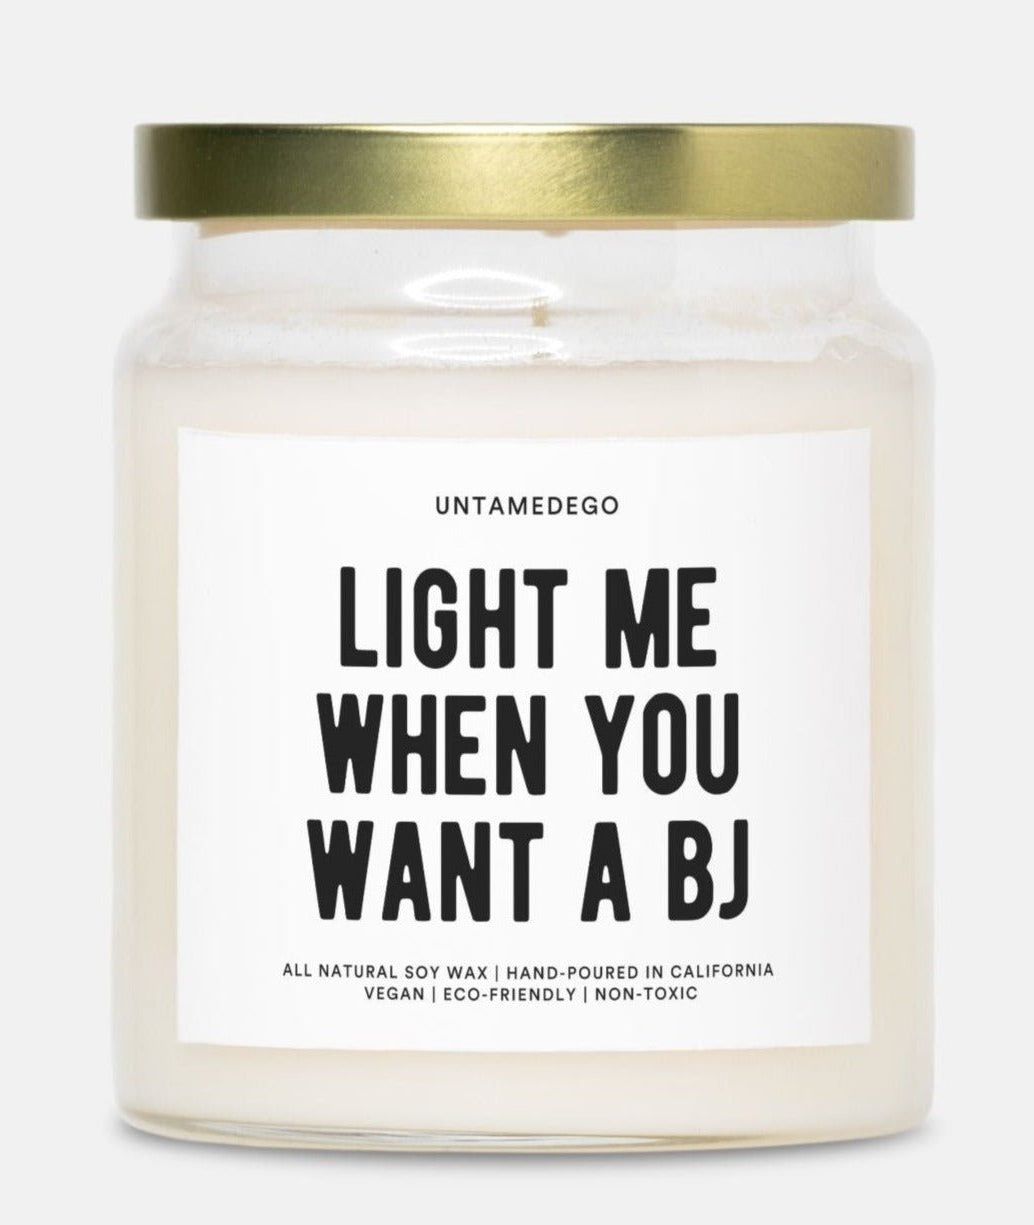 Light Me When You Want A Bj Gold Top Handpoured Candle - UntamedEgo LLC.